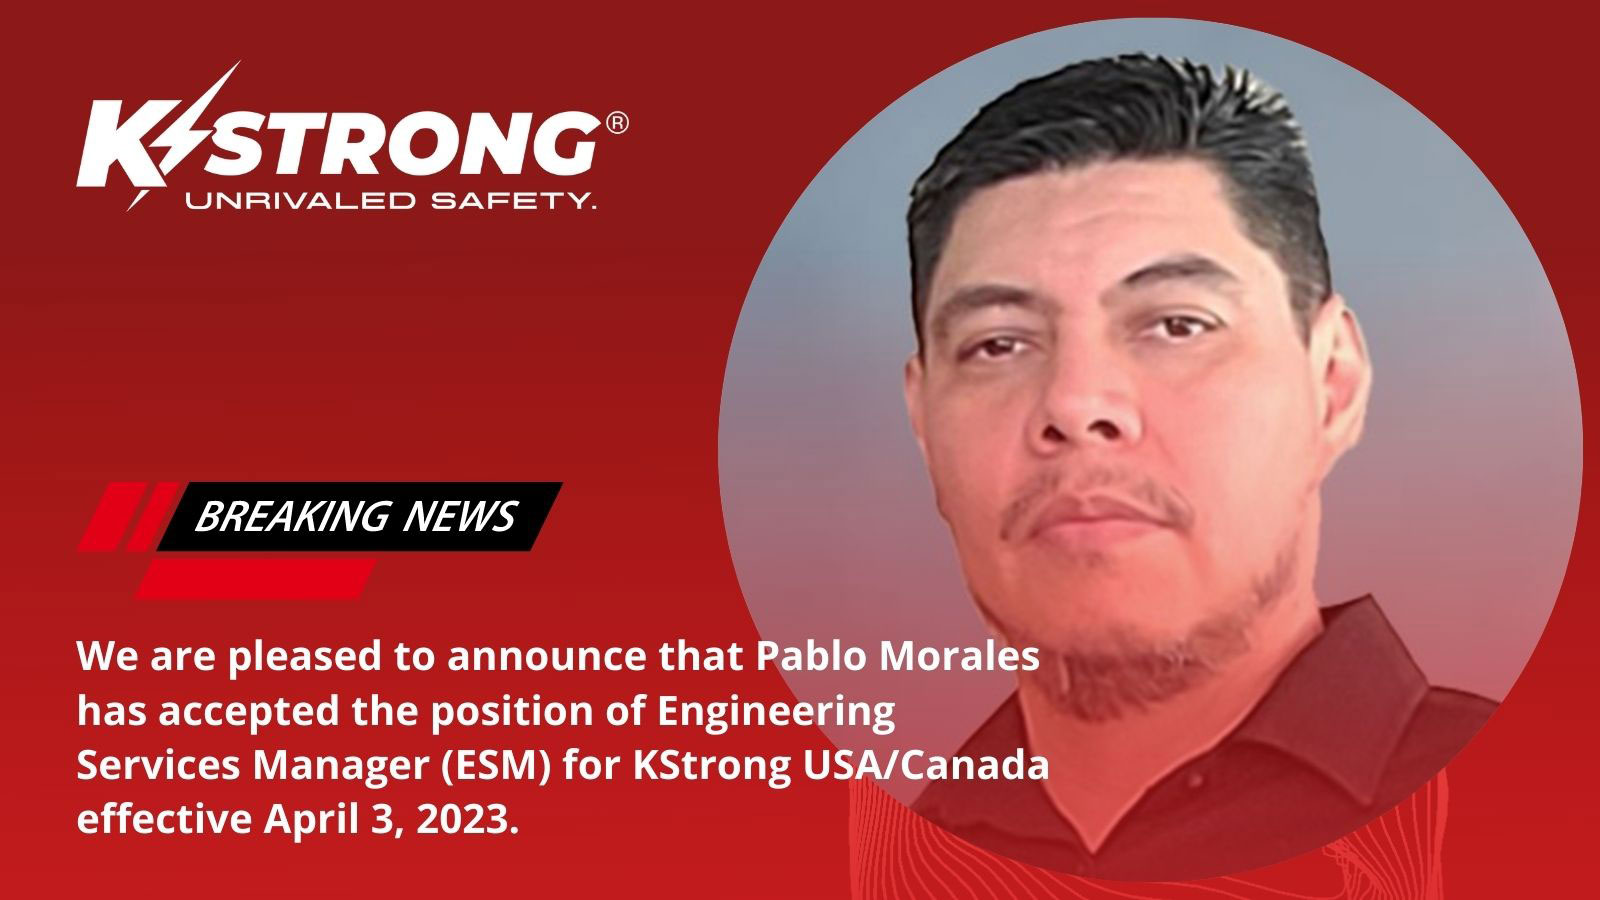 KStrong USA/Canada Welcomes Pablo Morales as Engineering Services Manager